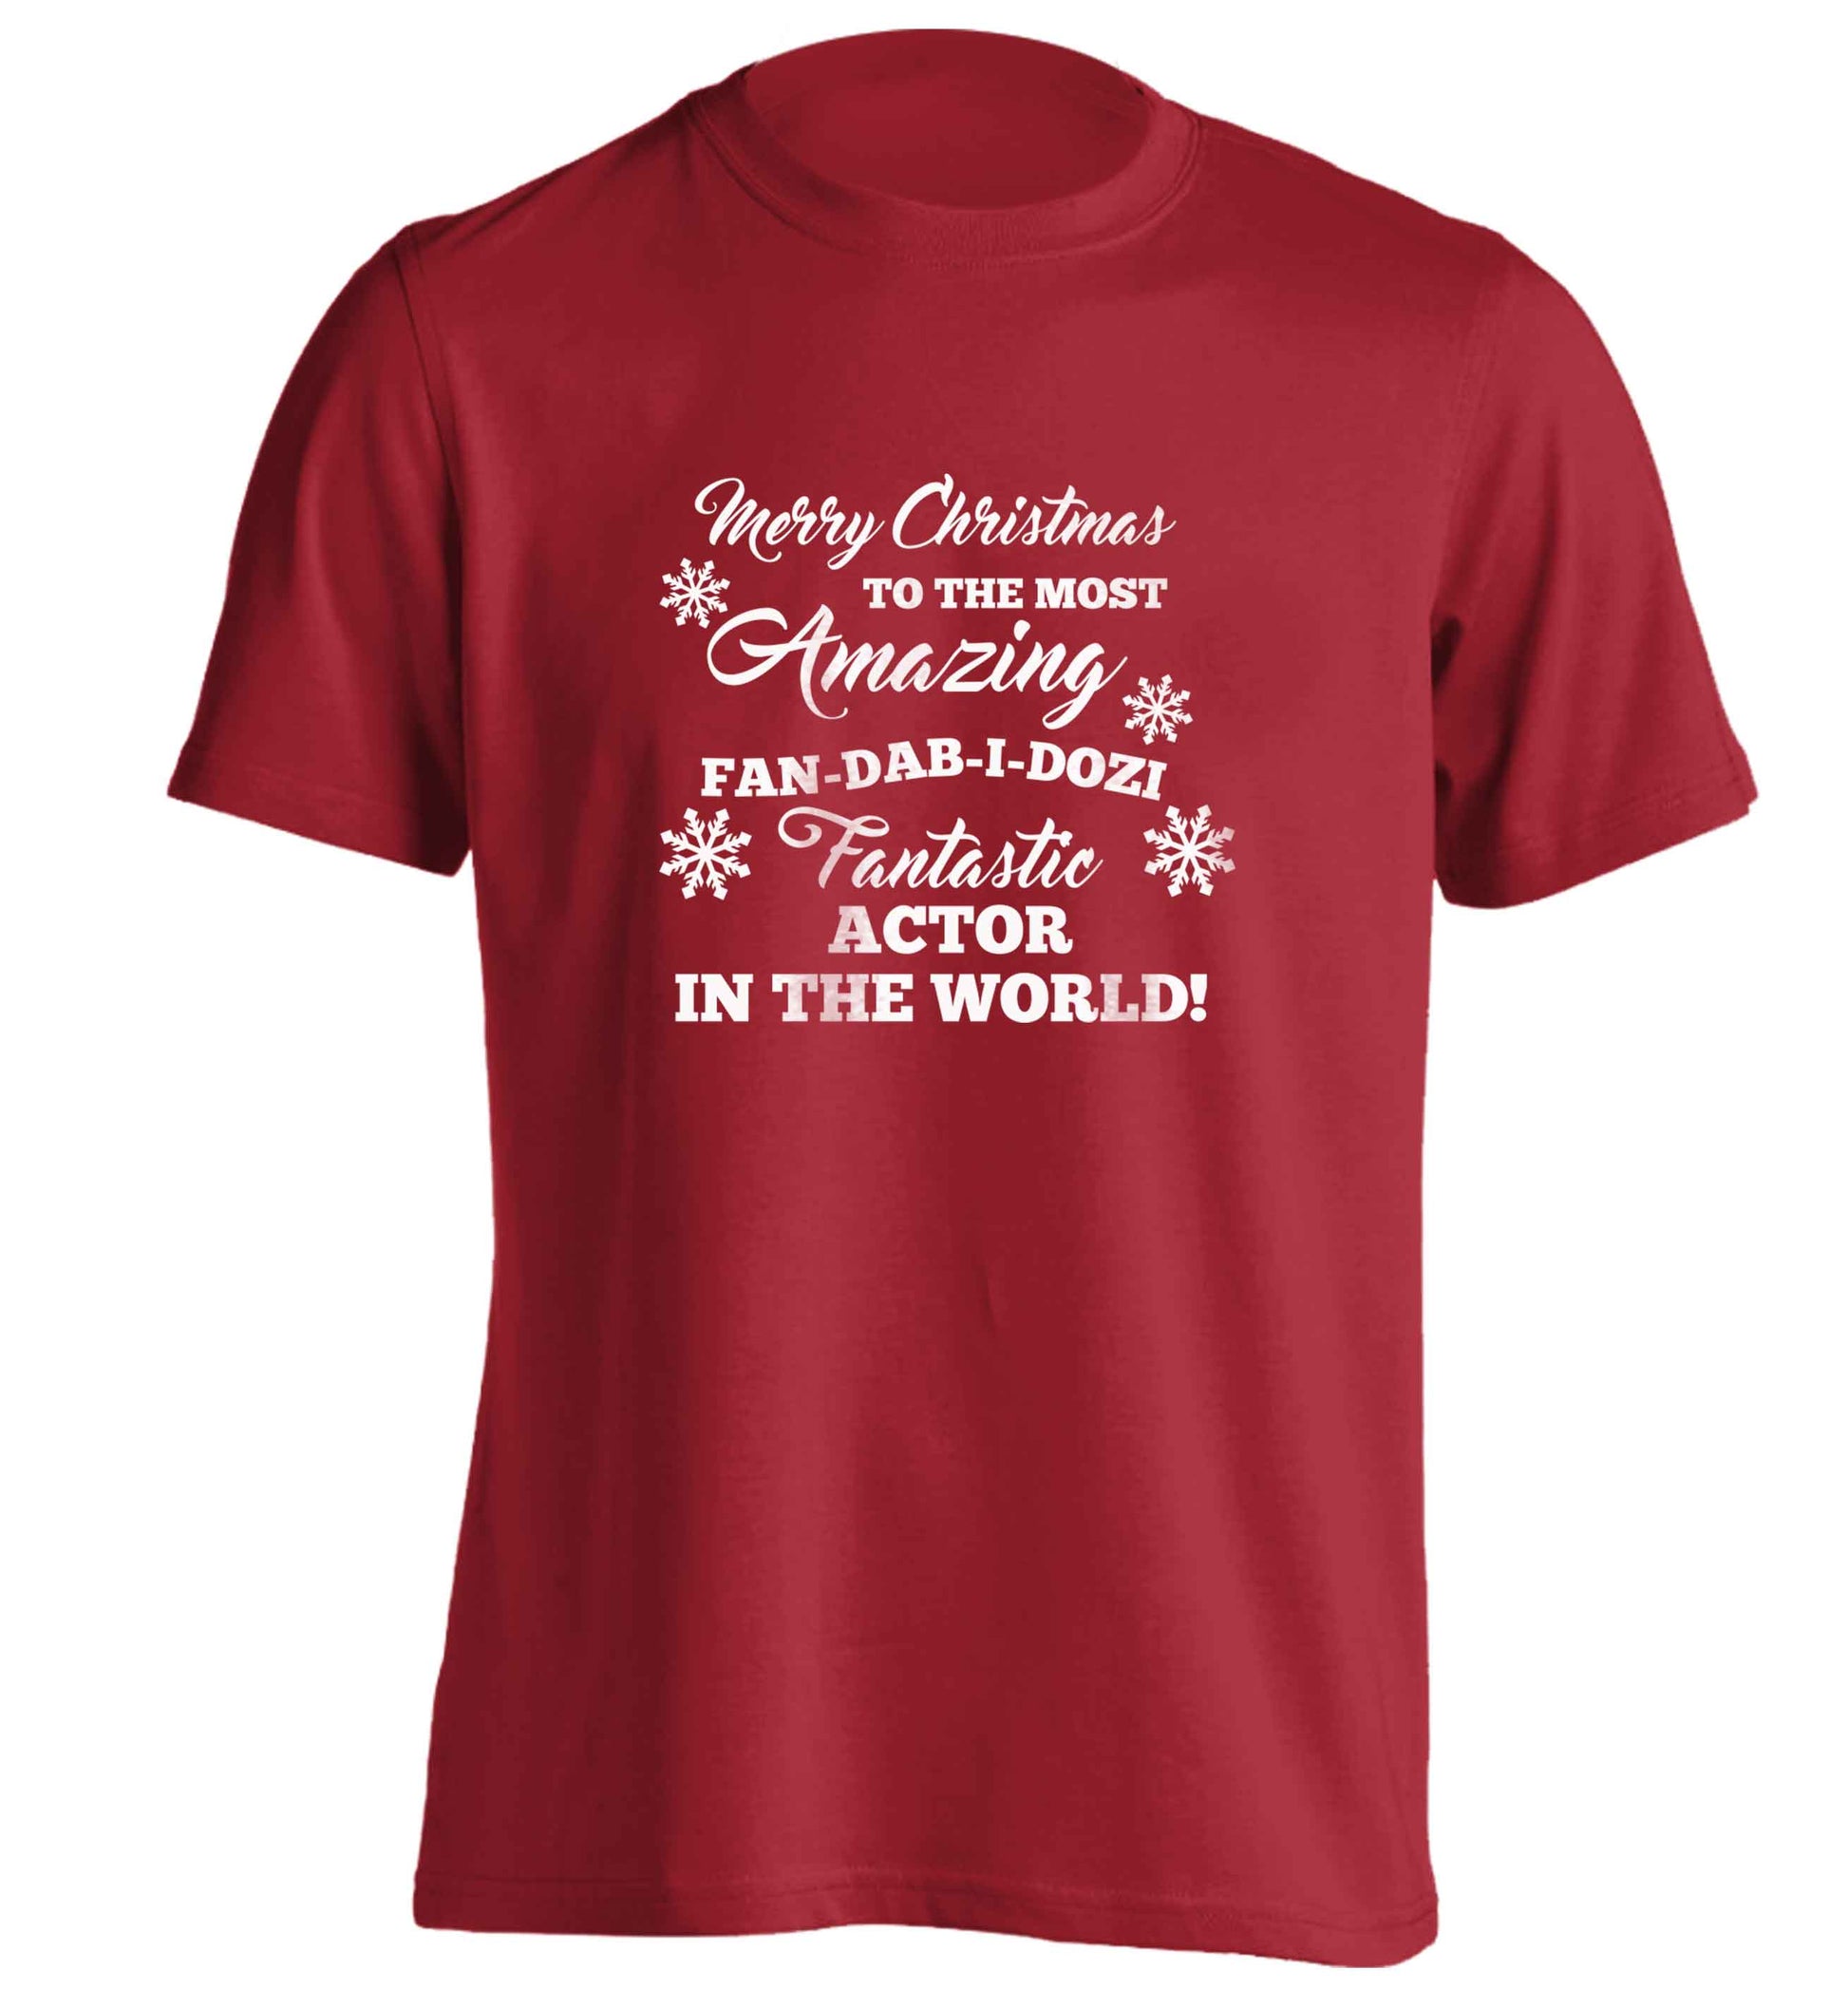 Merry Christmas to the most amazing actor in the world! adults unisex red Tshirt 2XL